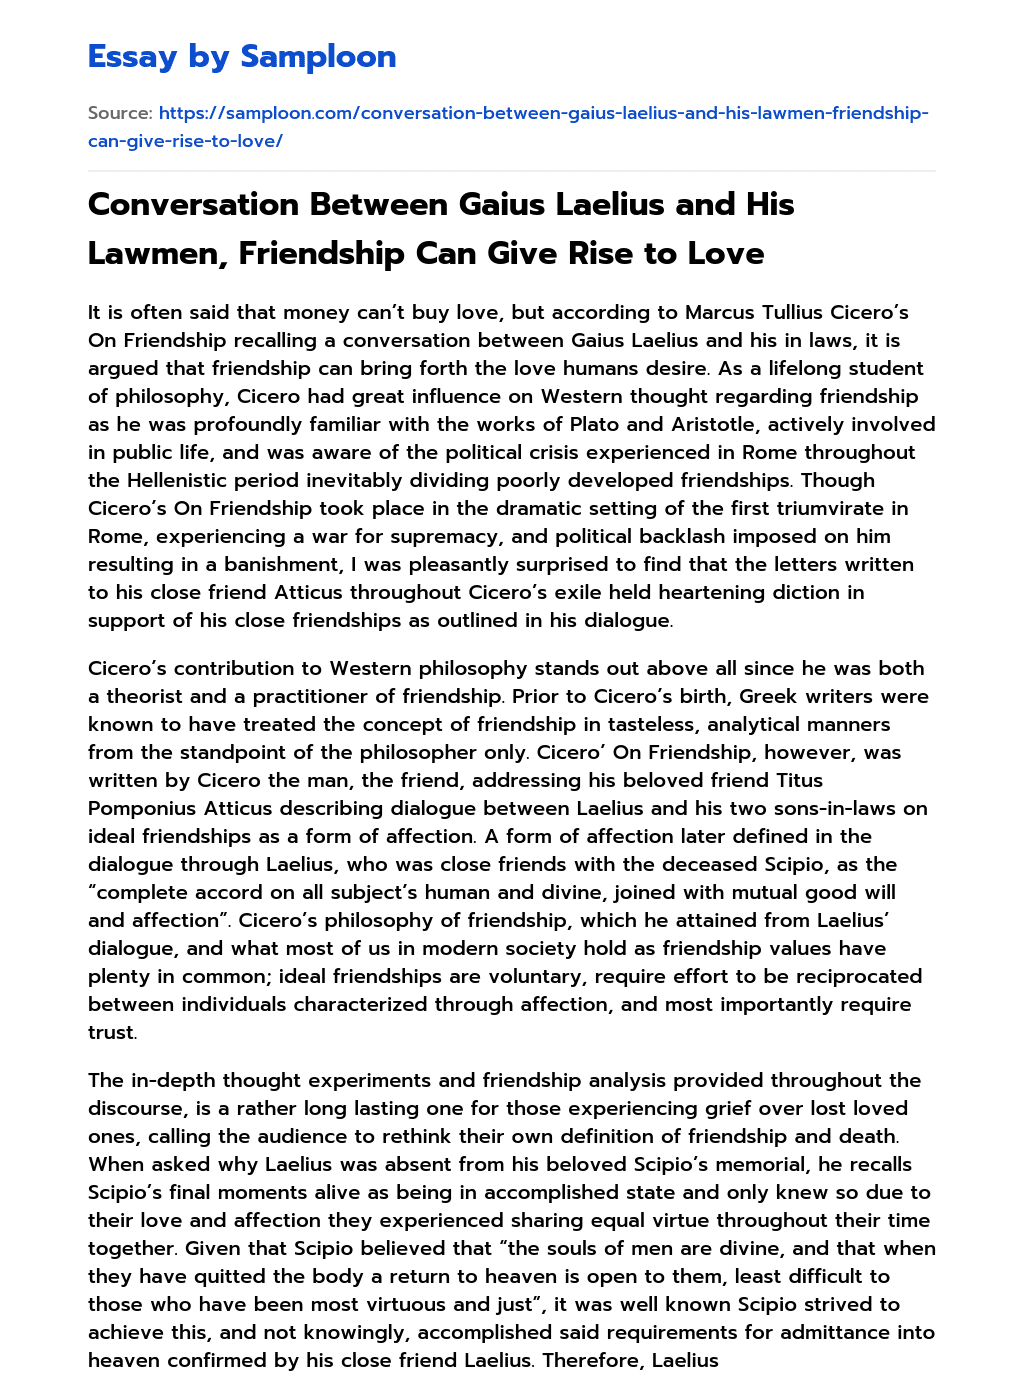 Conversation Between Gaius Laelius and His Lawmen, Friendship Can Give Rise to Love essay